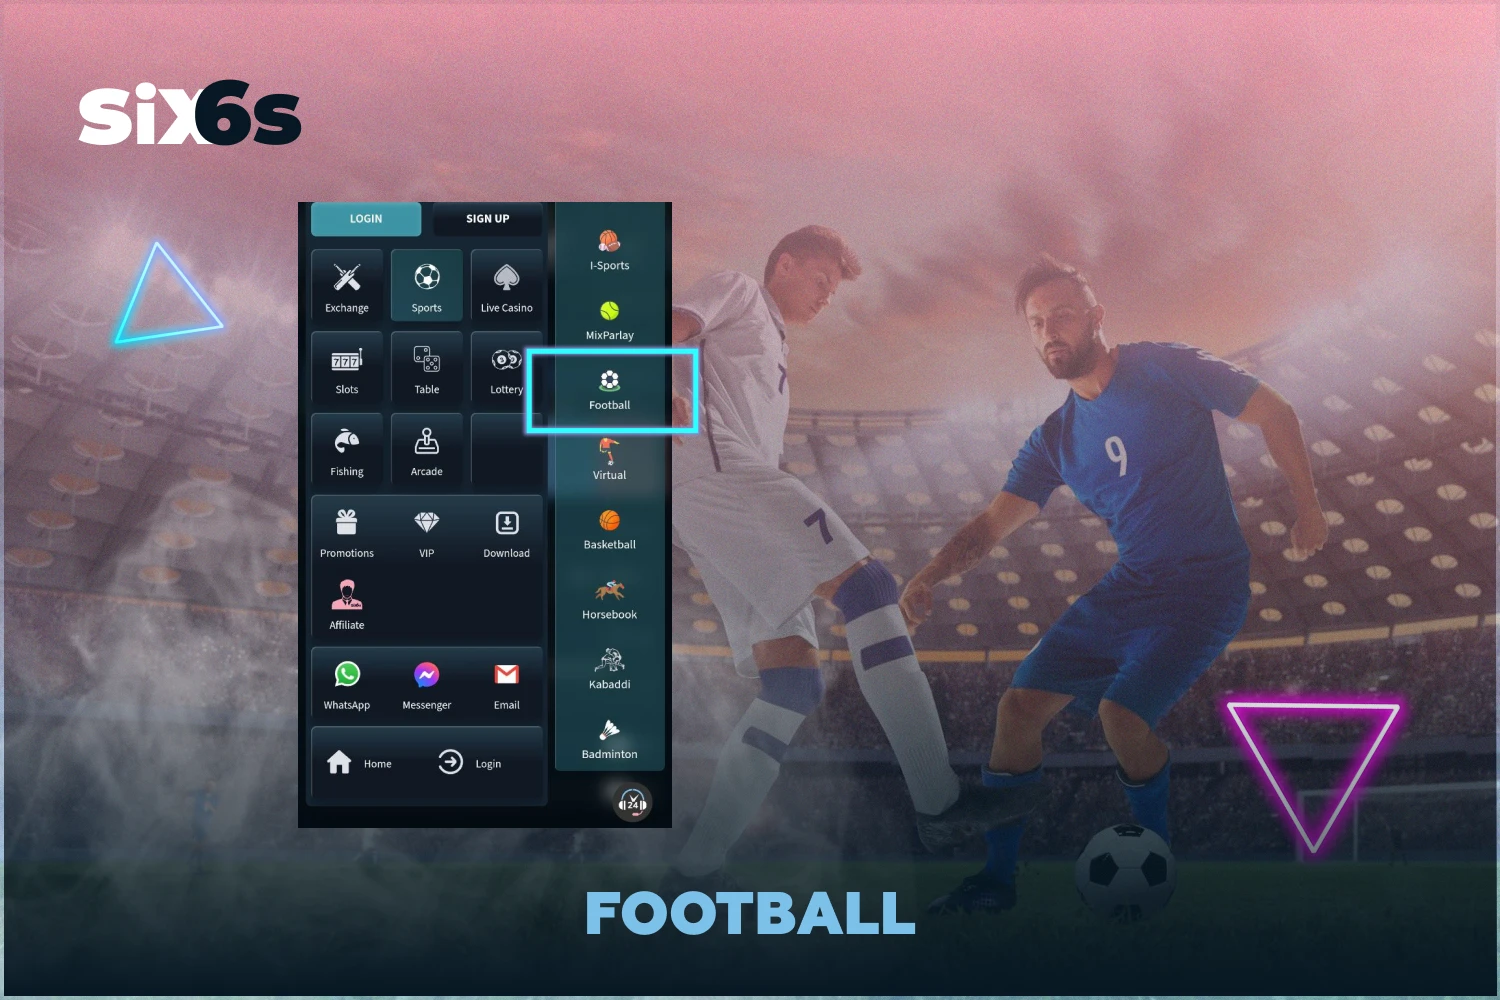 Six6s offers an opportunity for Bangladeshi players to bet on football